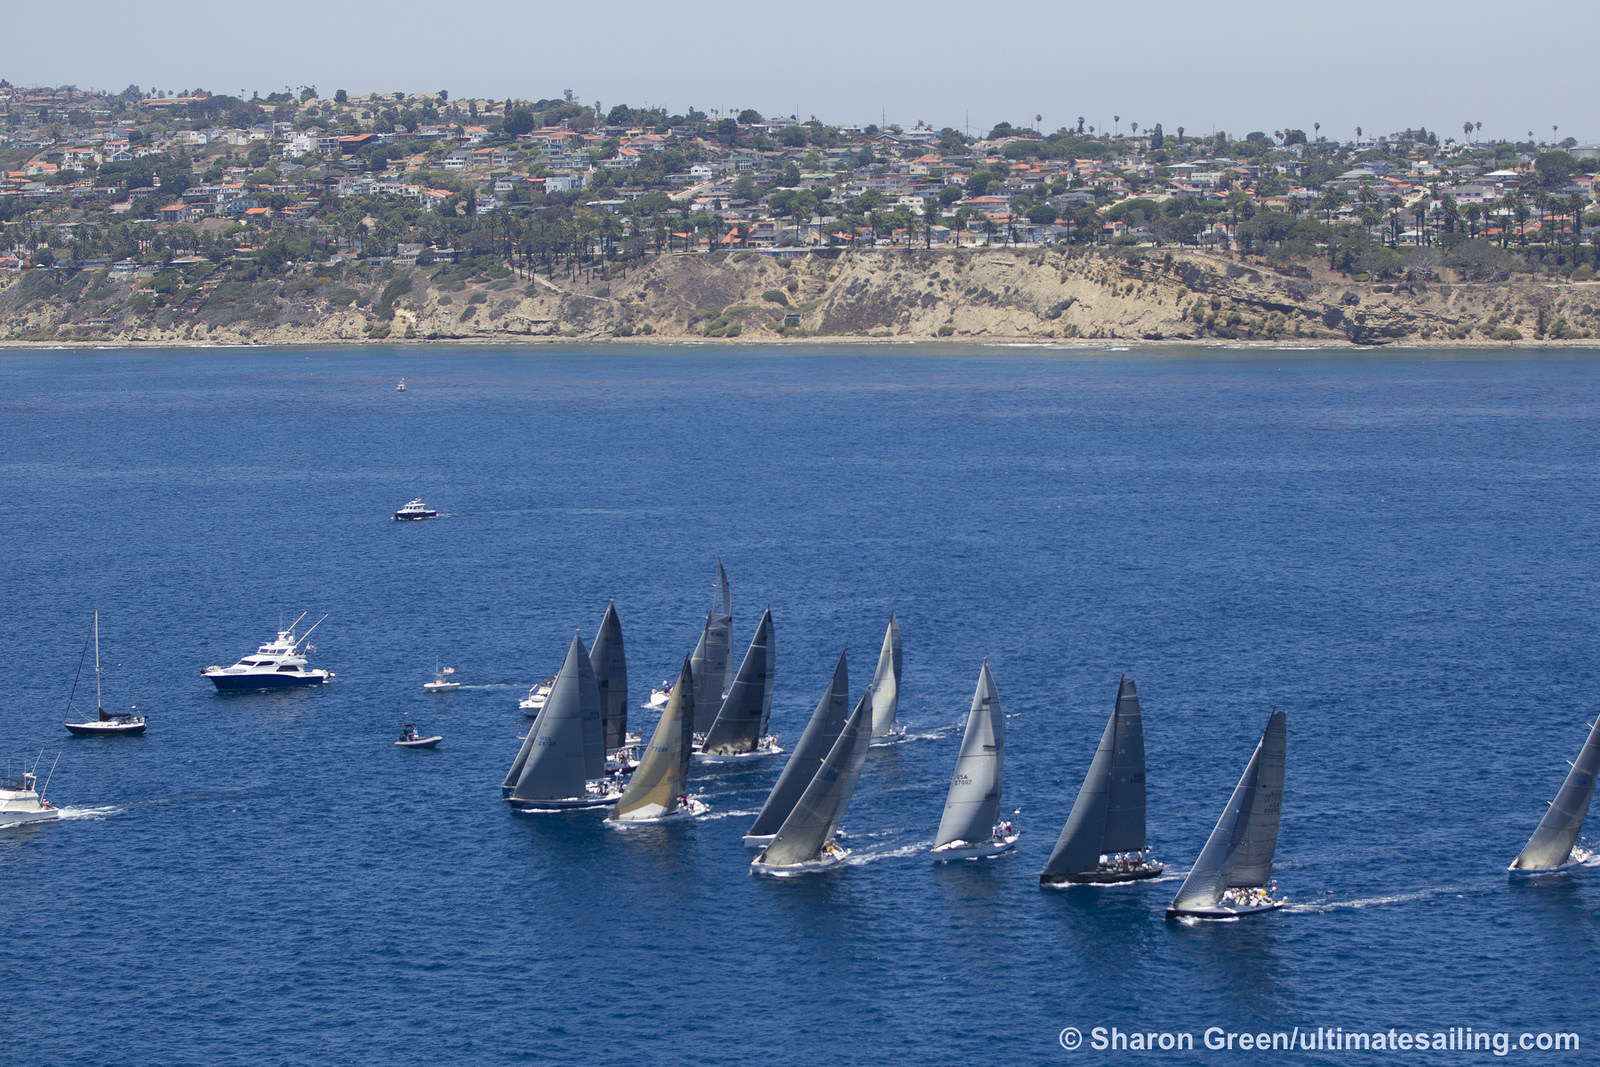  Various classes  49th Transpac Regatta Los Angeles  Honolulu, Start of the final wave with the fastest boats yesterday